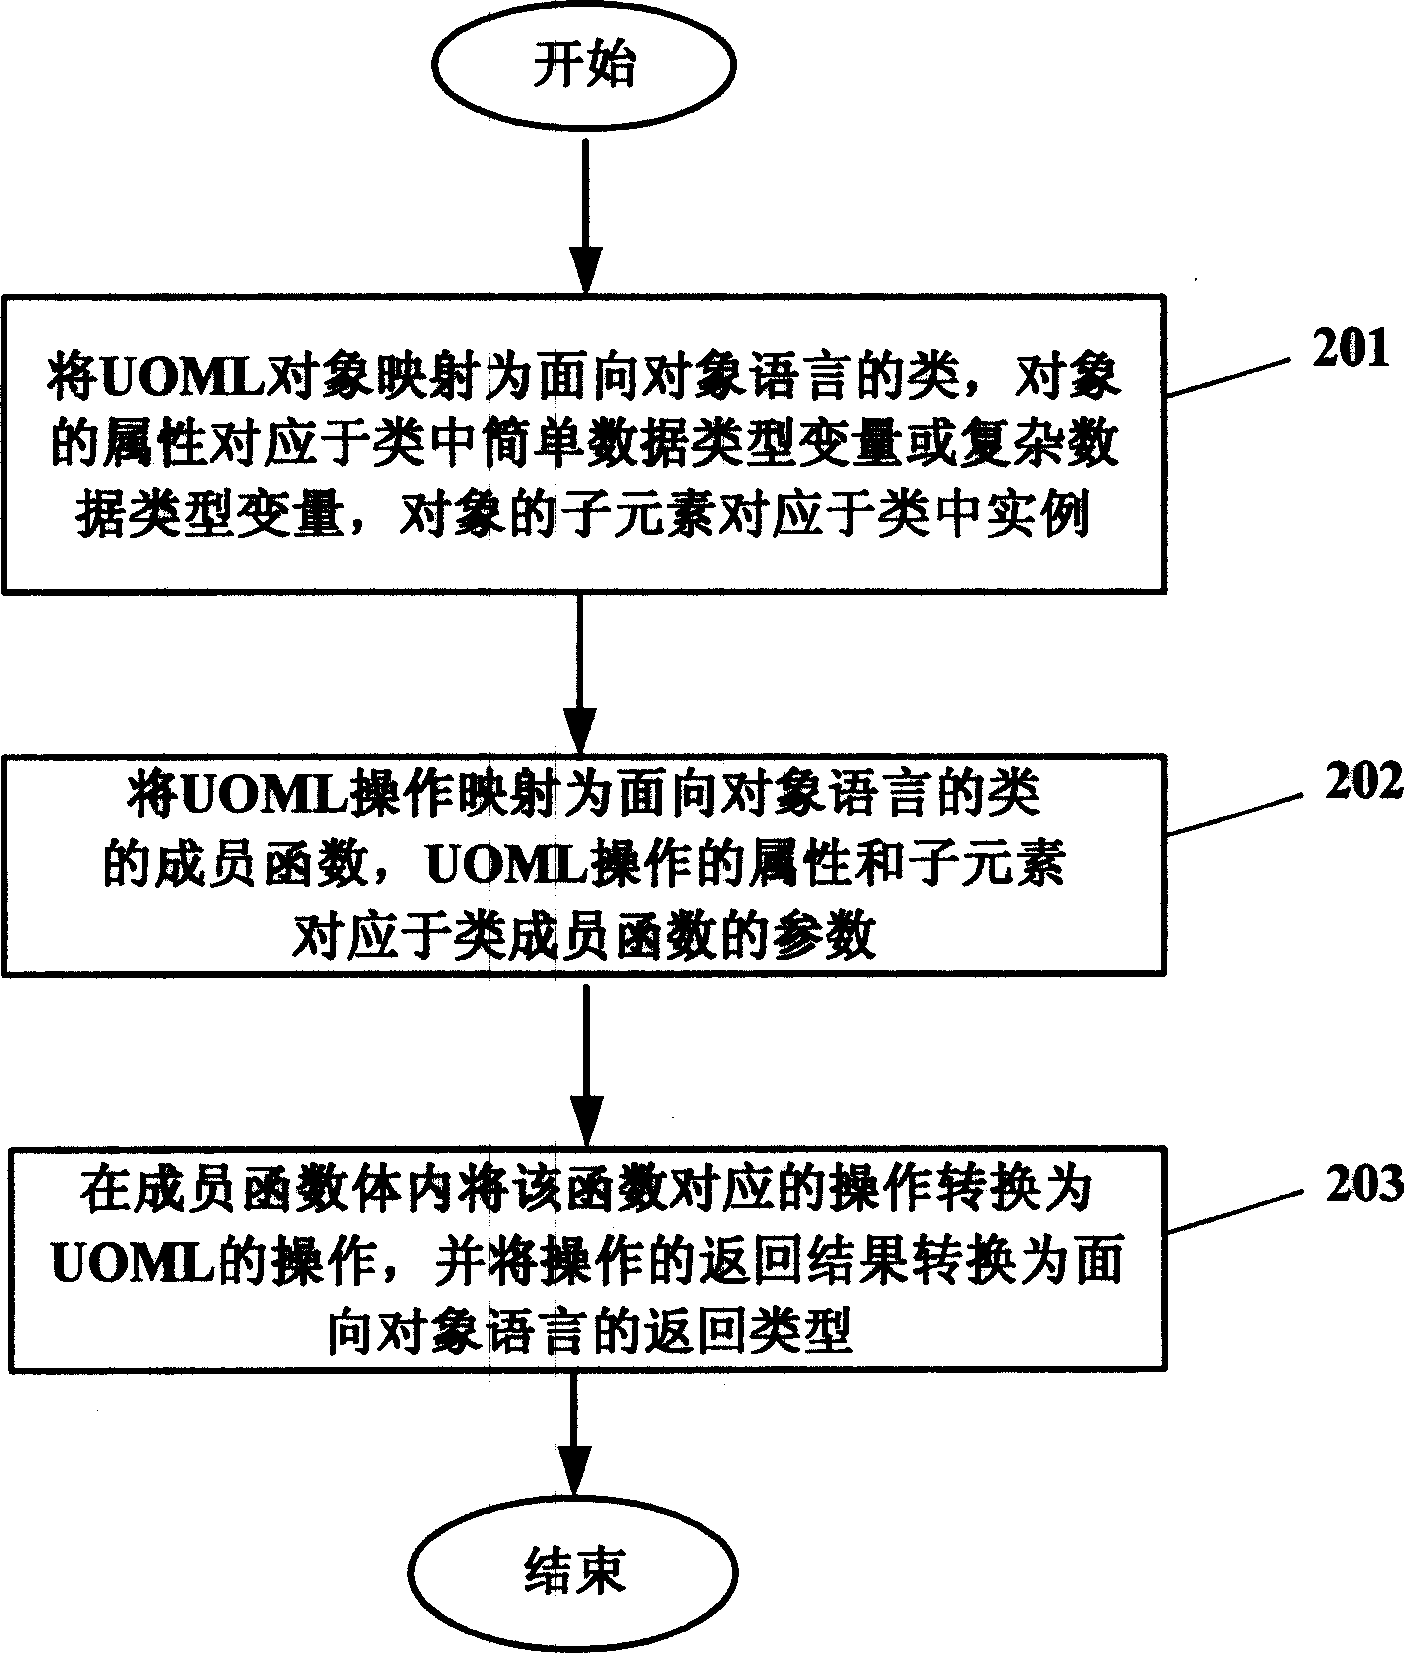 Method for packaging UOML into application program interface